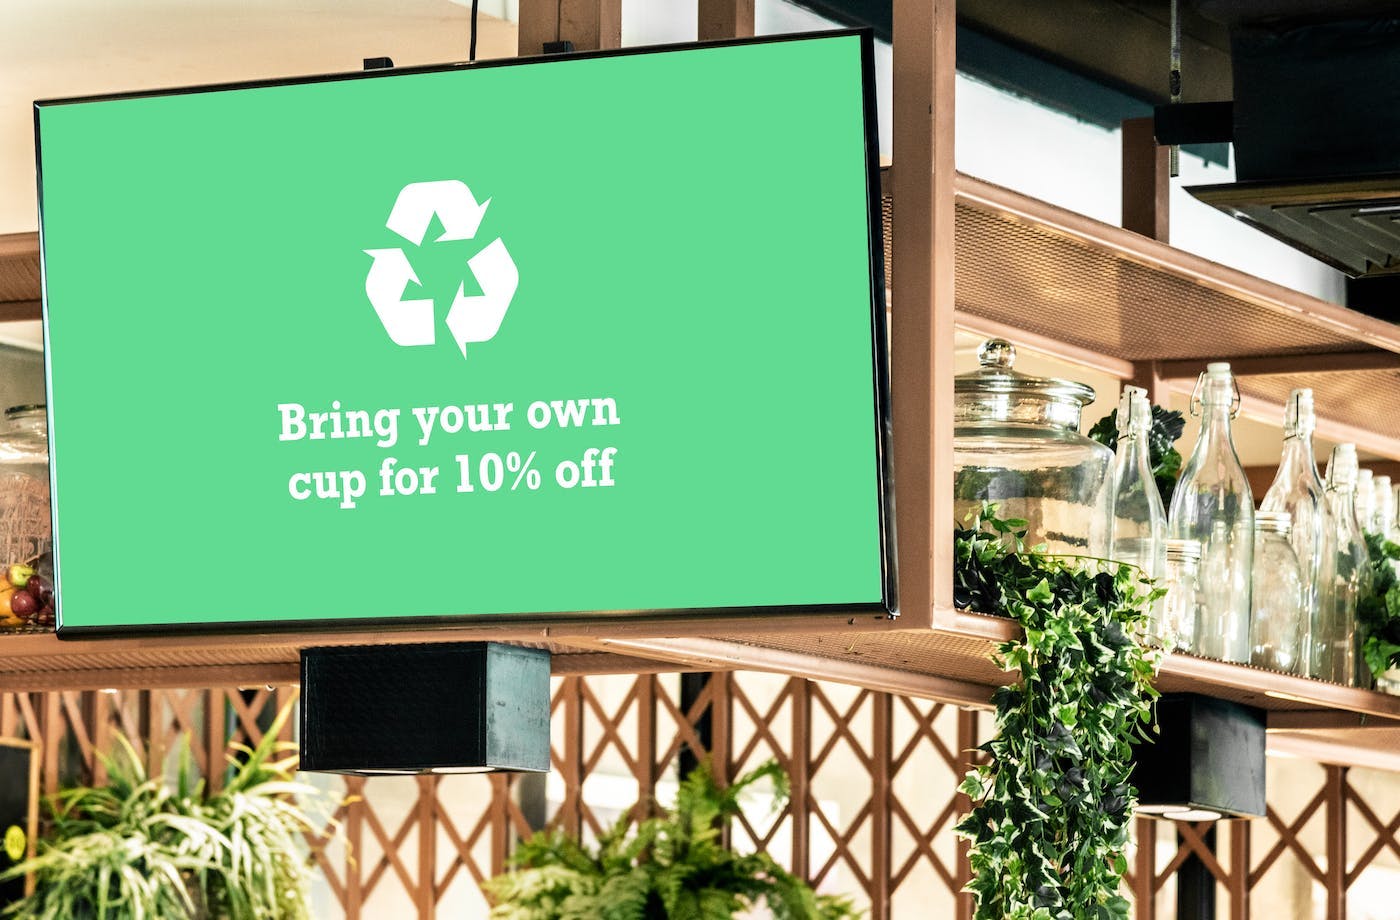 ScreenCloud Article - How Business Digital Signage Can Help Reduce Your Environmental Footprint